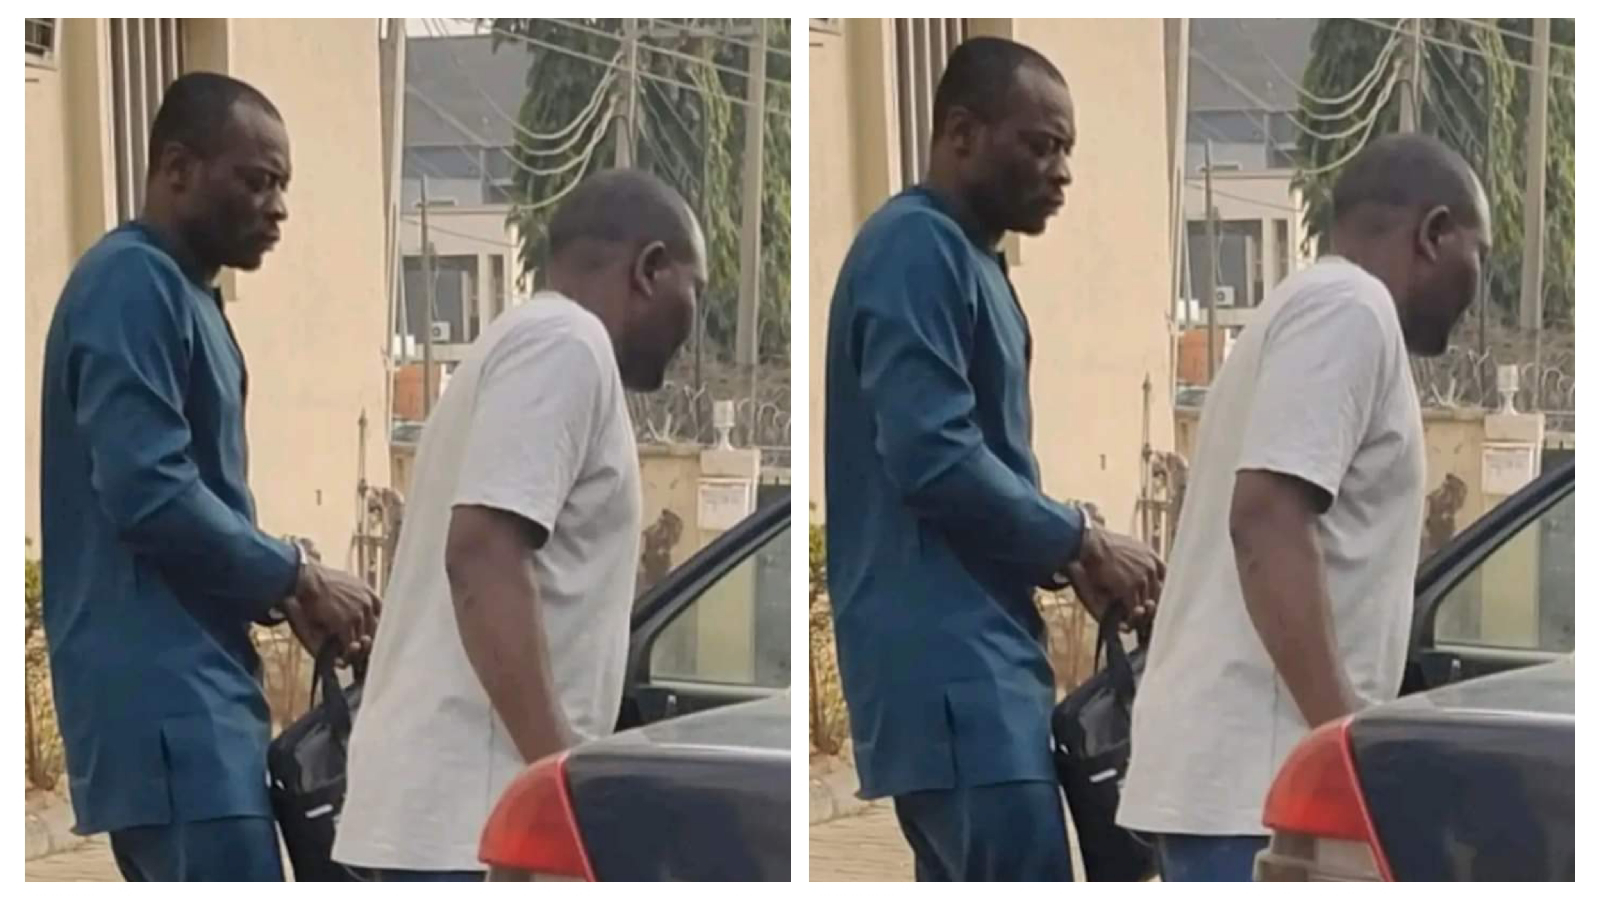 HANDCUFFED PHOTO Udele Ijele in handcuffs after being arrested in